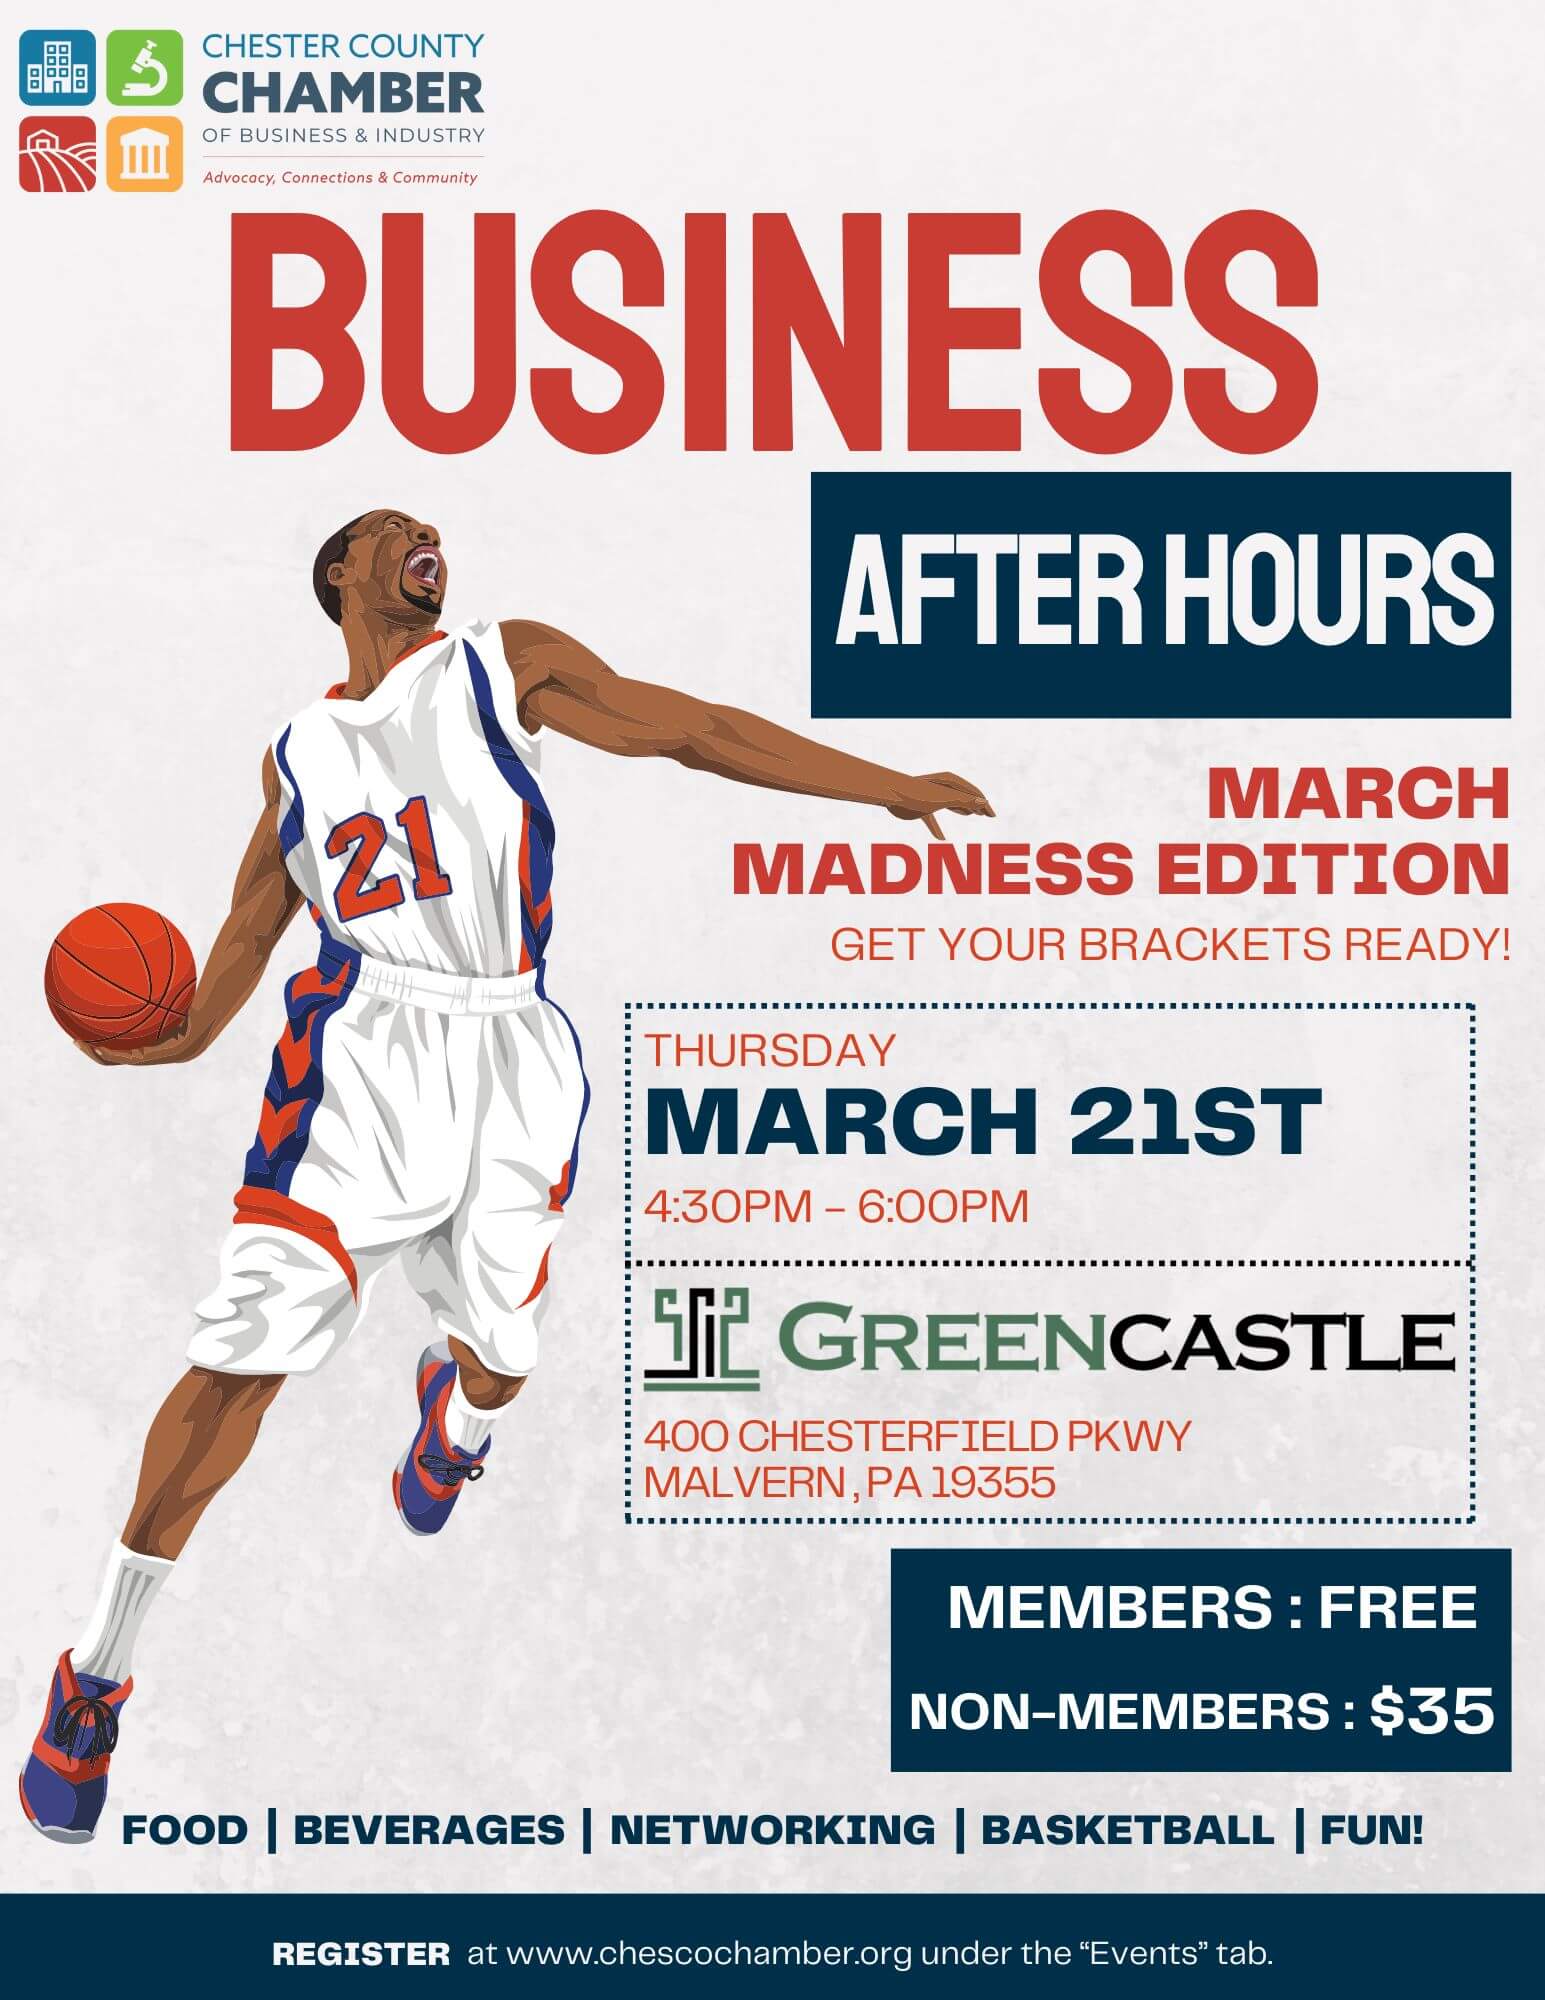 MARCH MADNESS BUSINESS AFTER HOURS